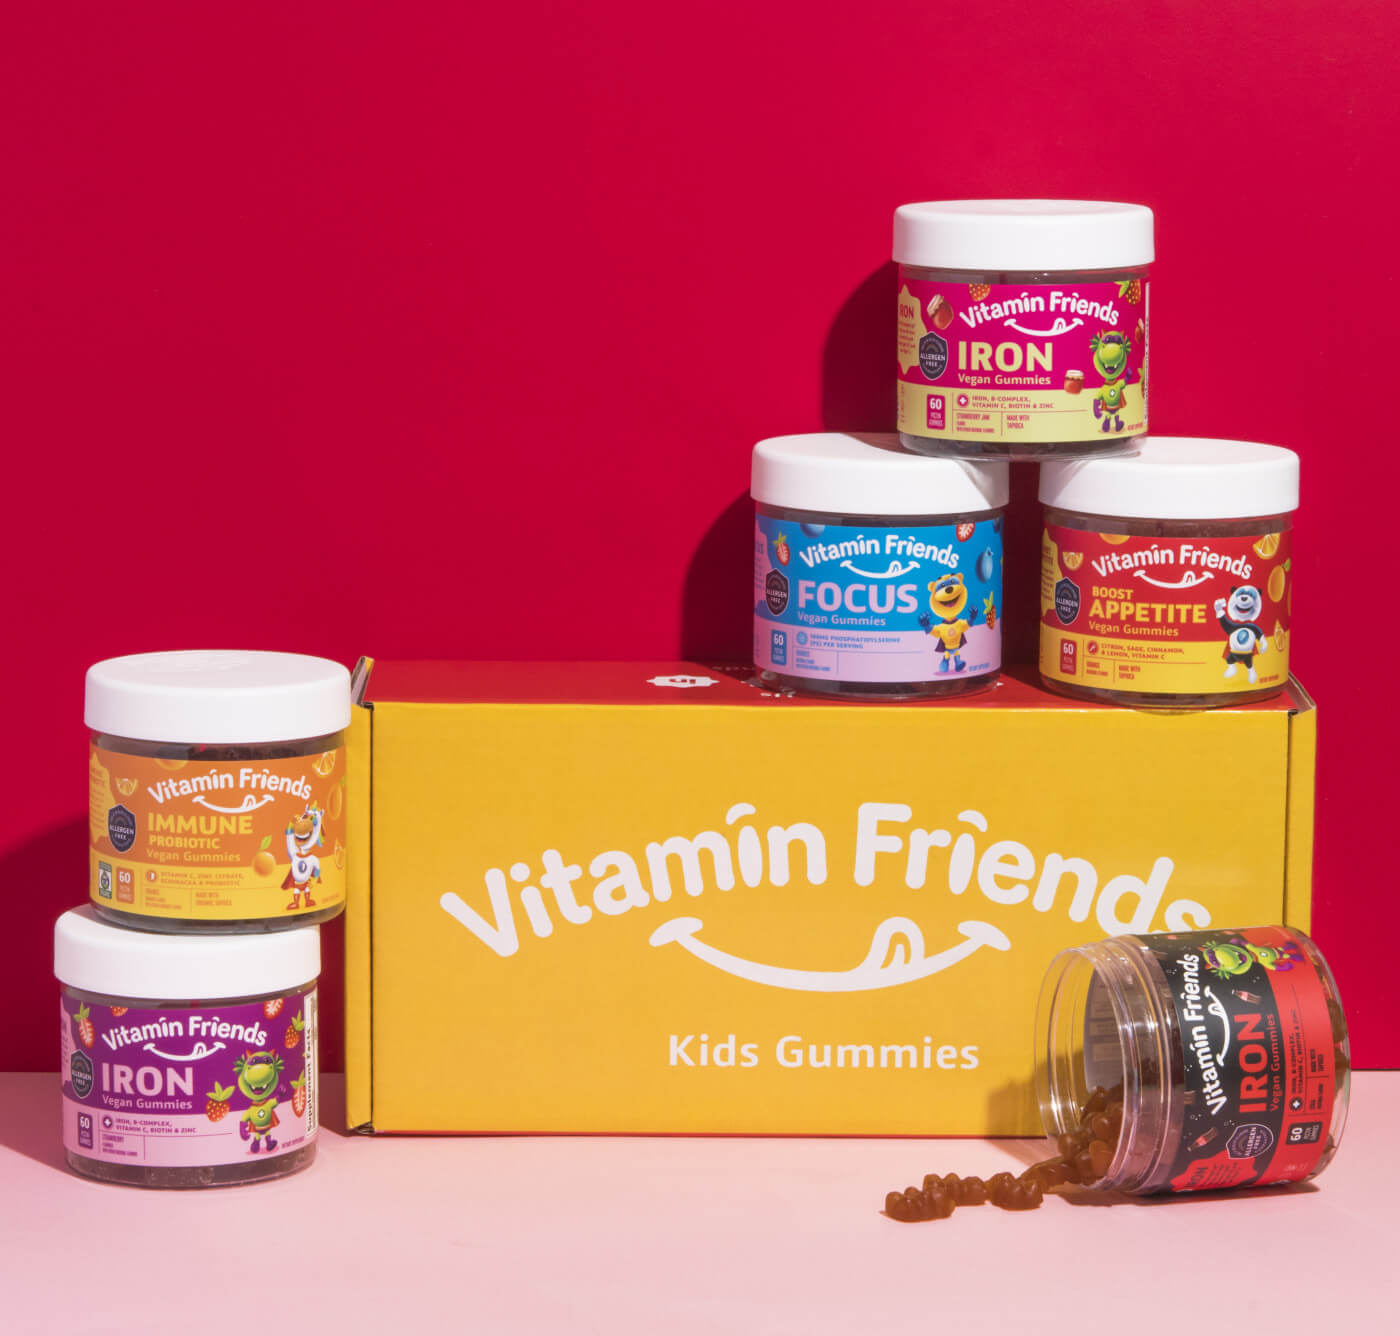 Welcome to Vitamin Friends!